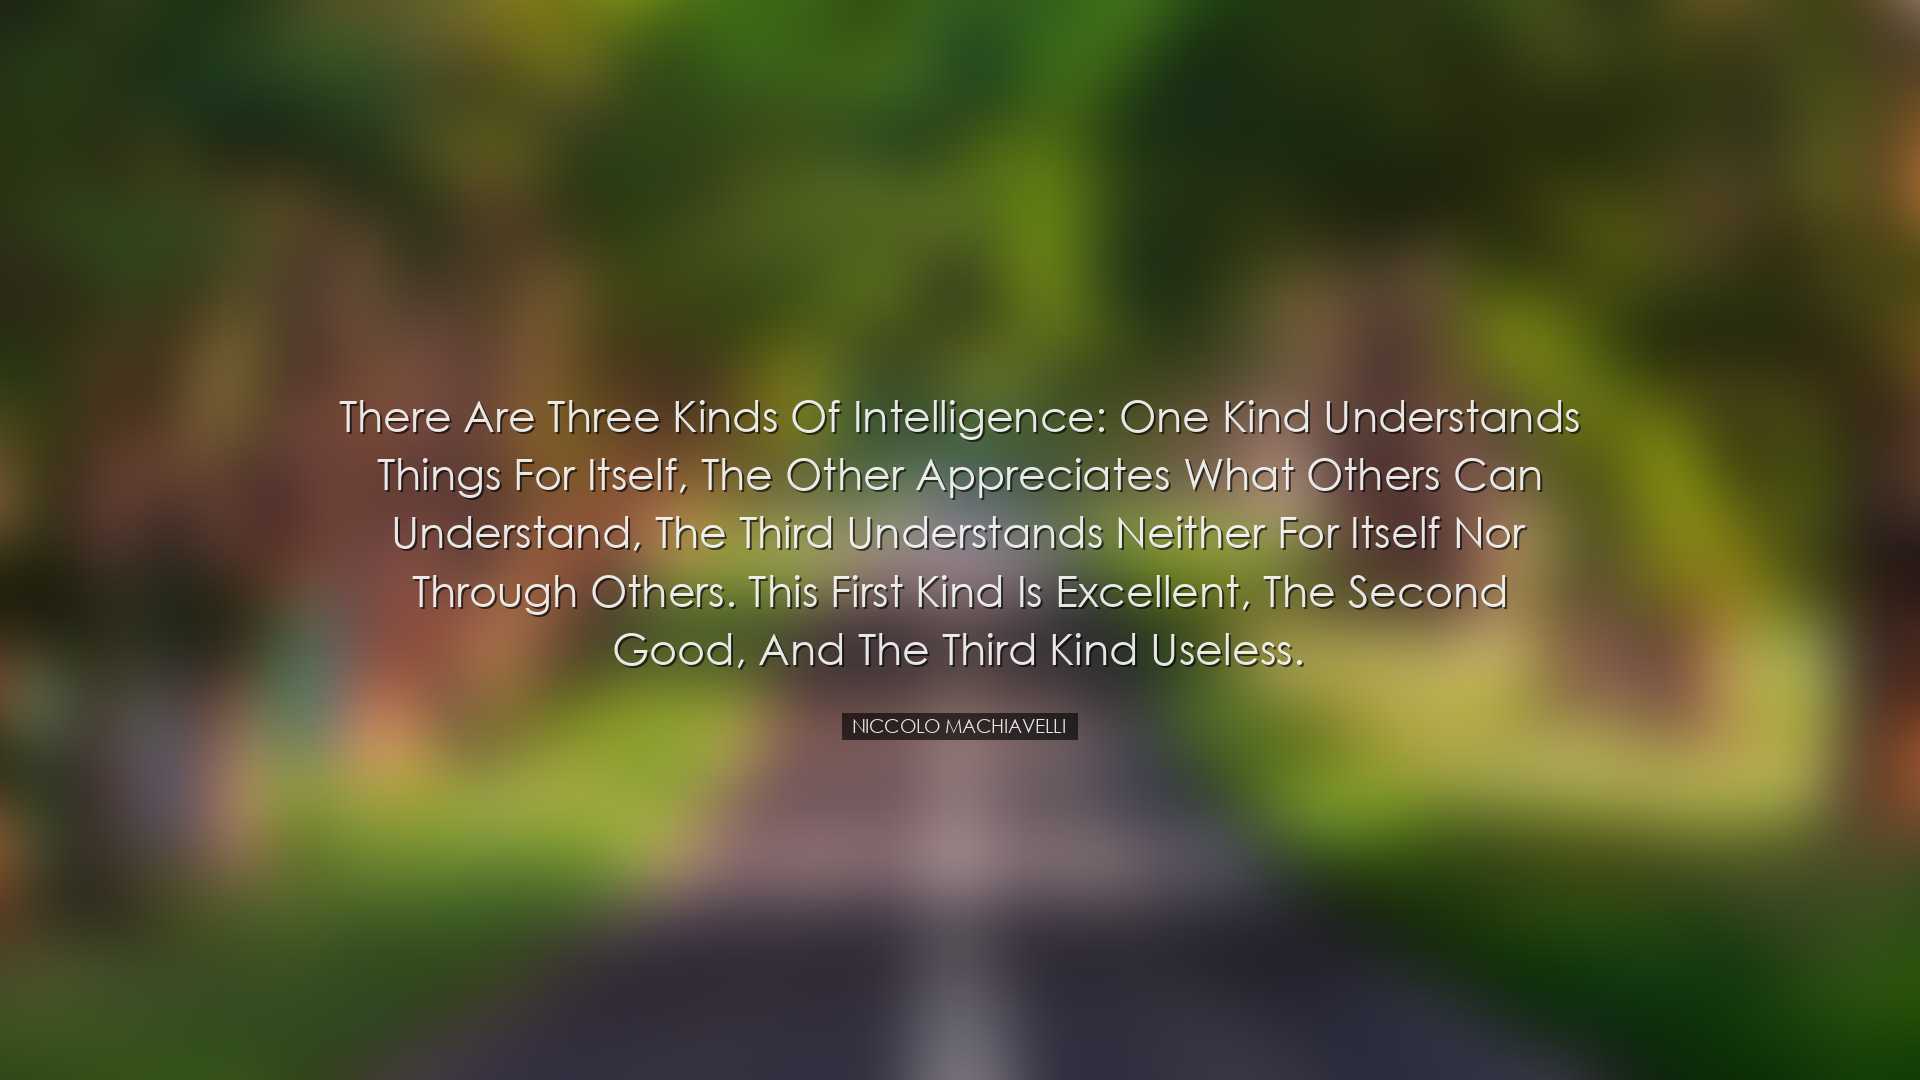 There are three kinds of intelligence: one kind understands things